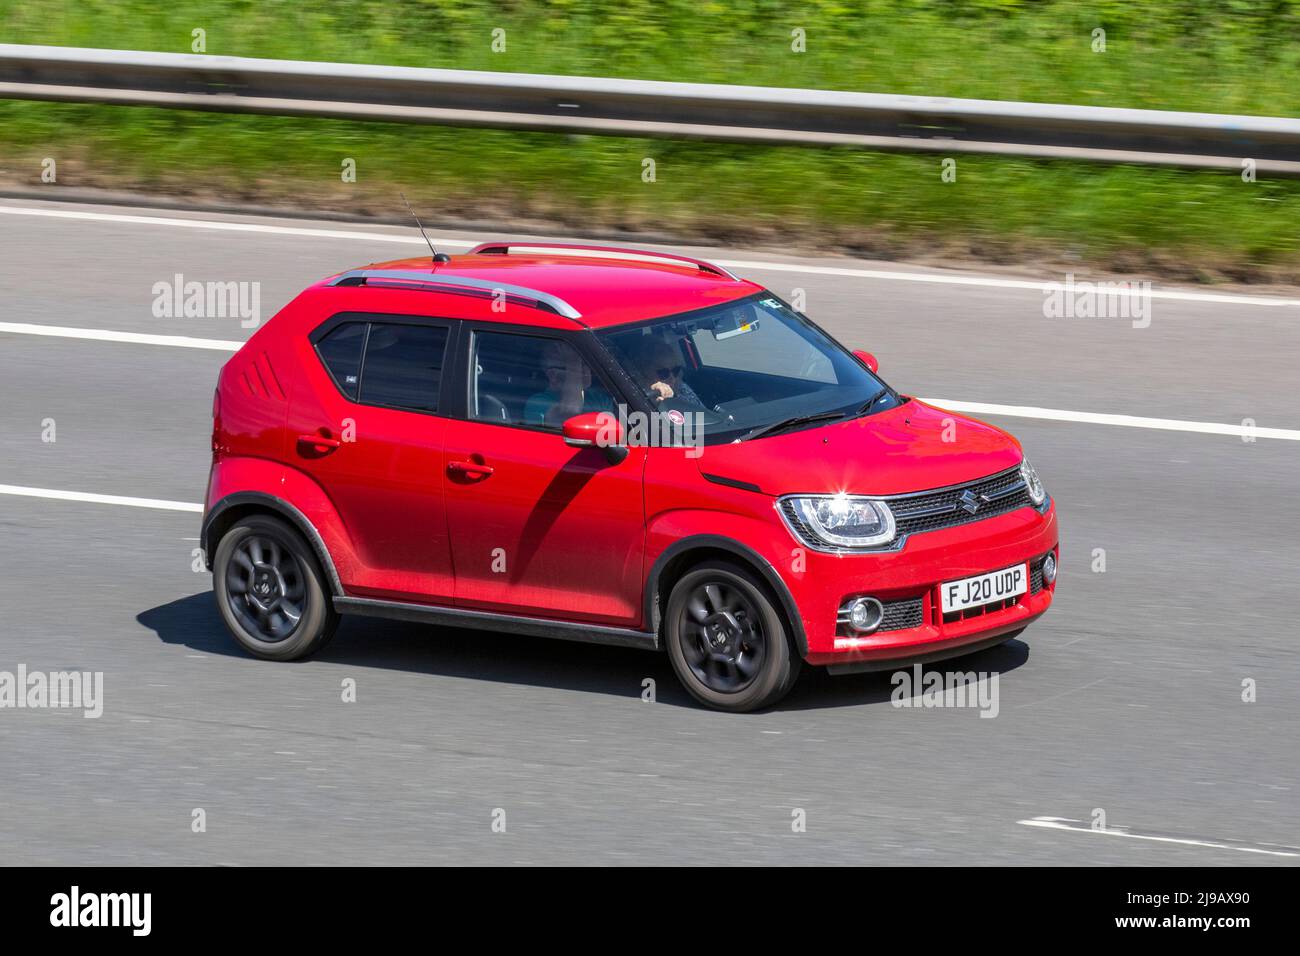 Suzuki ignis cars hi-res stock photography and images - Alamy